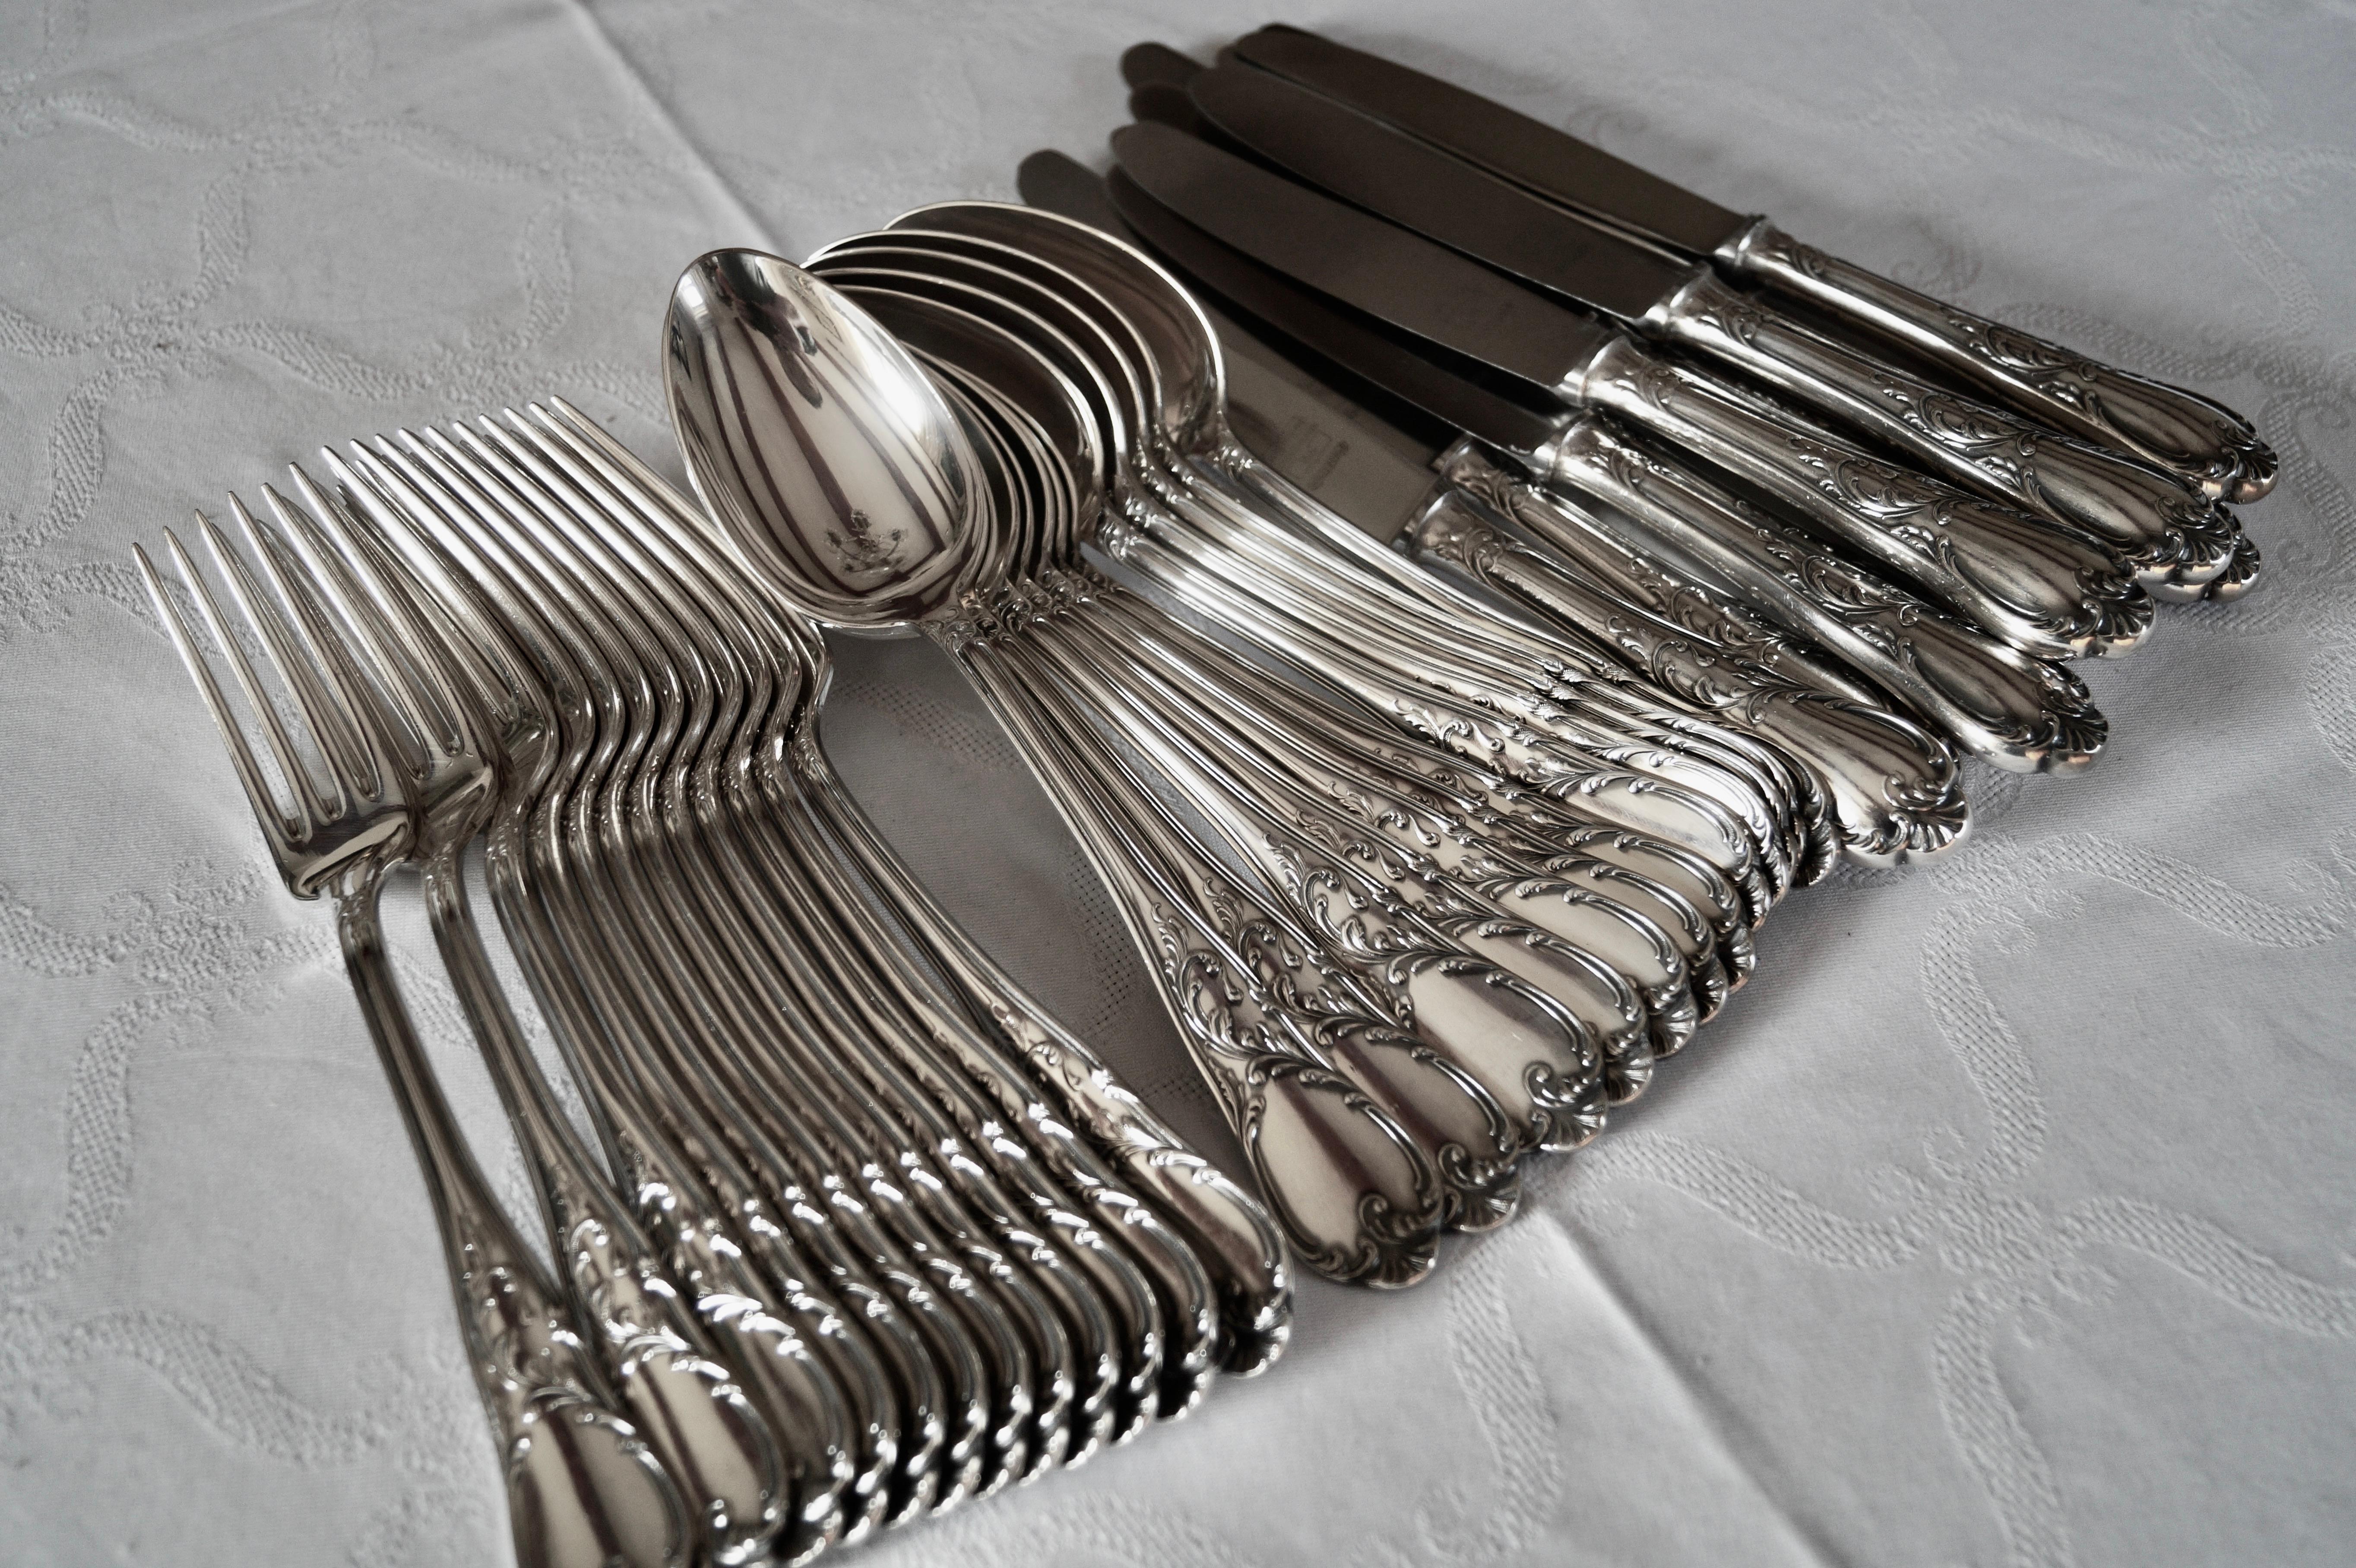 Beautiful antique high quality silver-plated cutlery set from the famous Belgium silversmith 